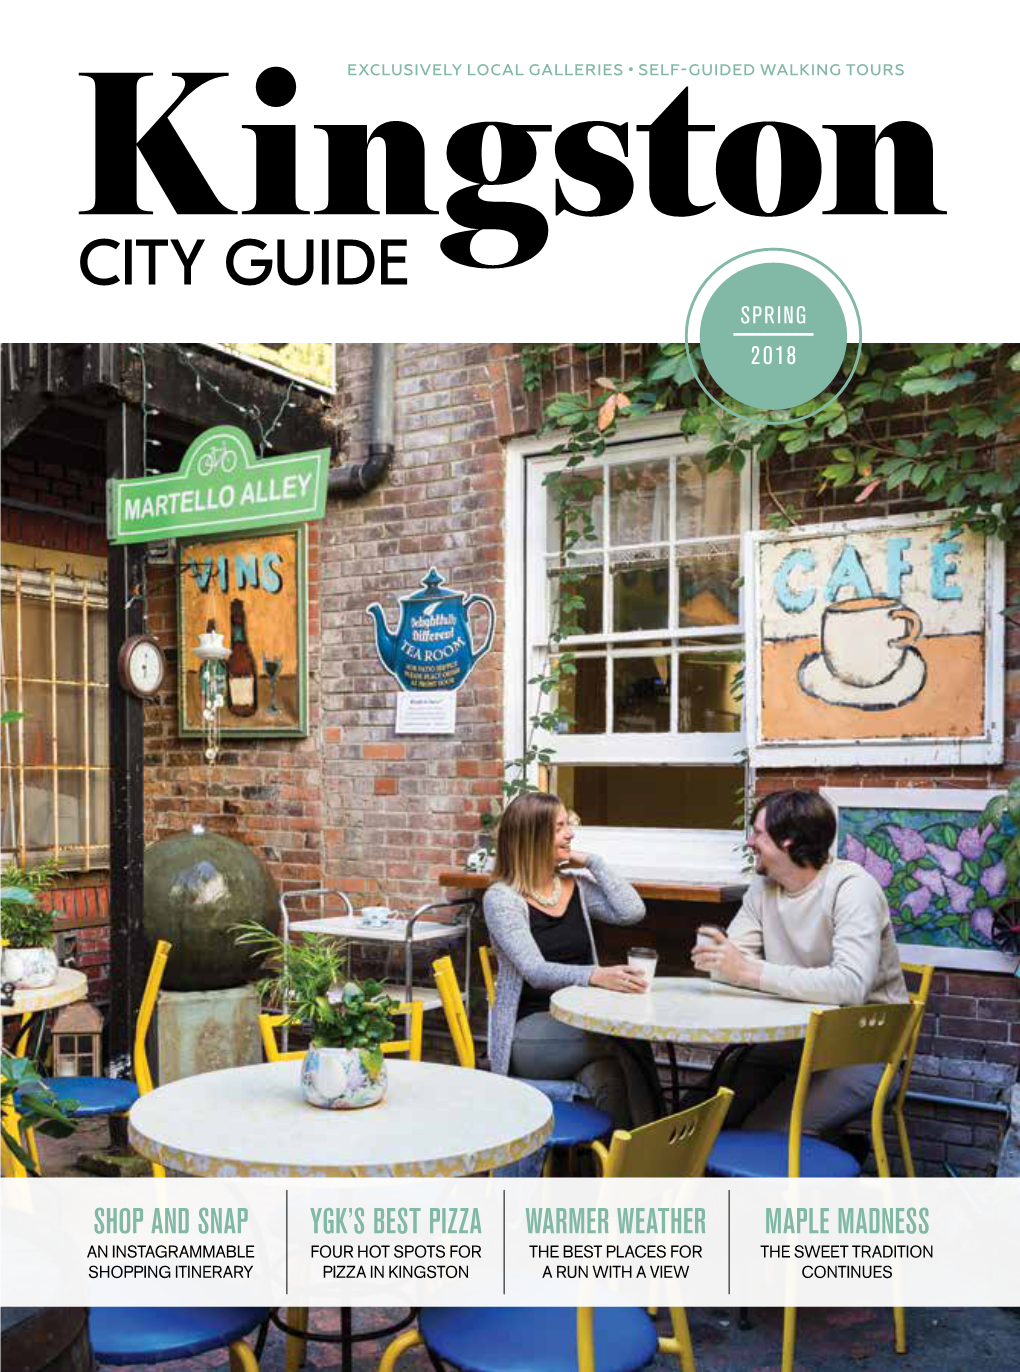 Kingston City Guide I Spring 2018 Exclusively Local Galleries • Self-Guided Walking Tours